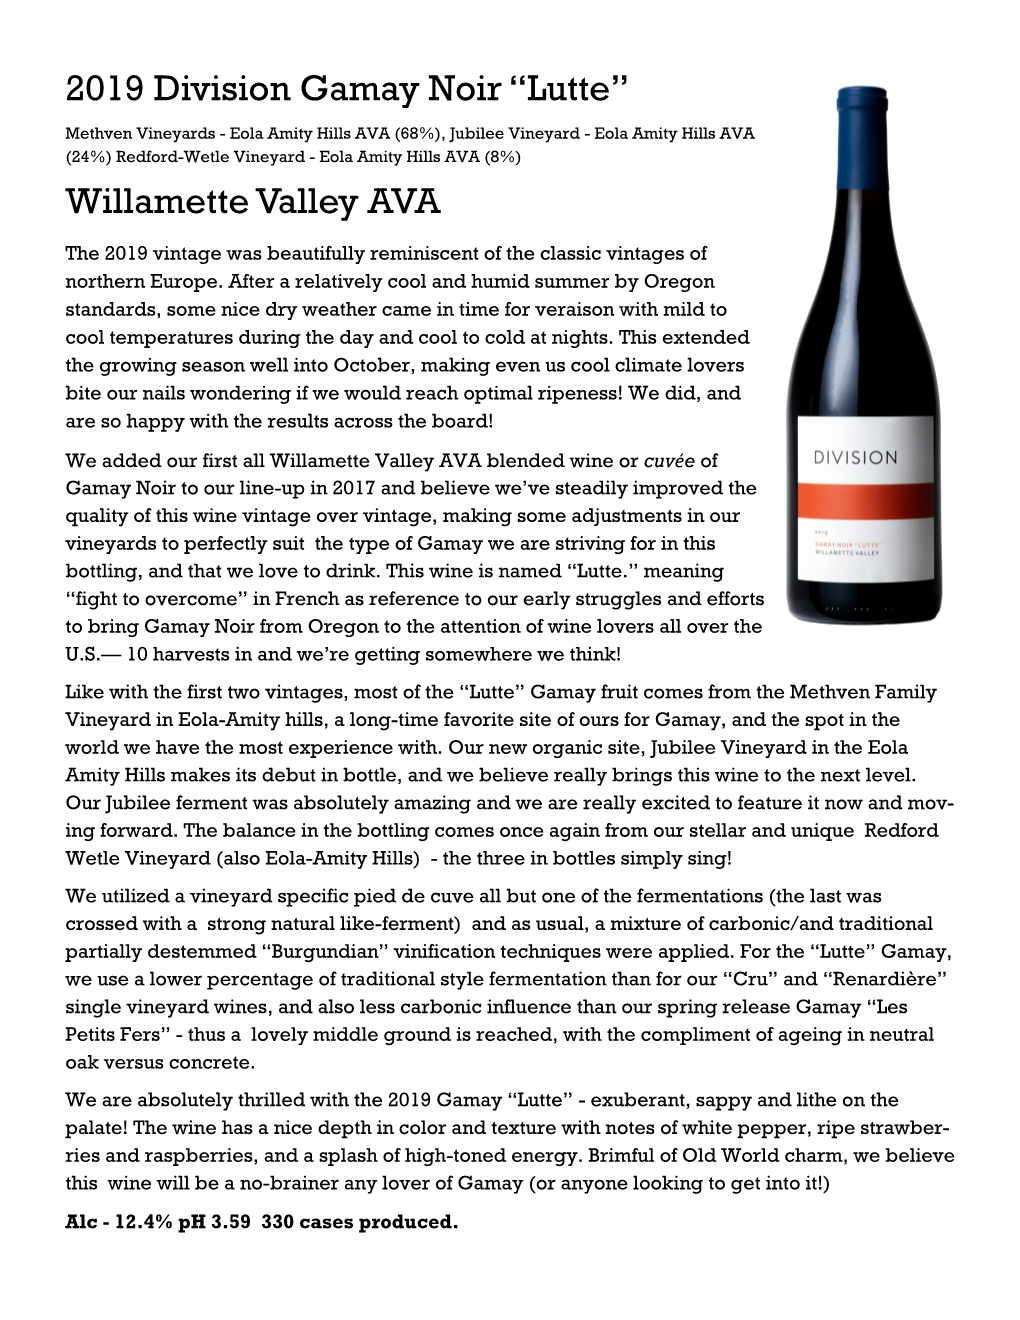 2019 Division Gamay Noir “Lutte” Willamette Valley